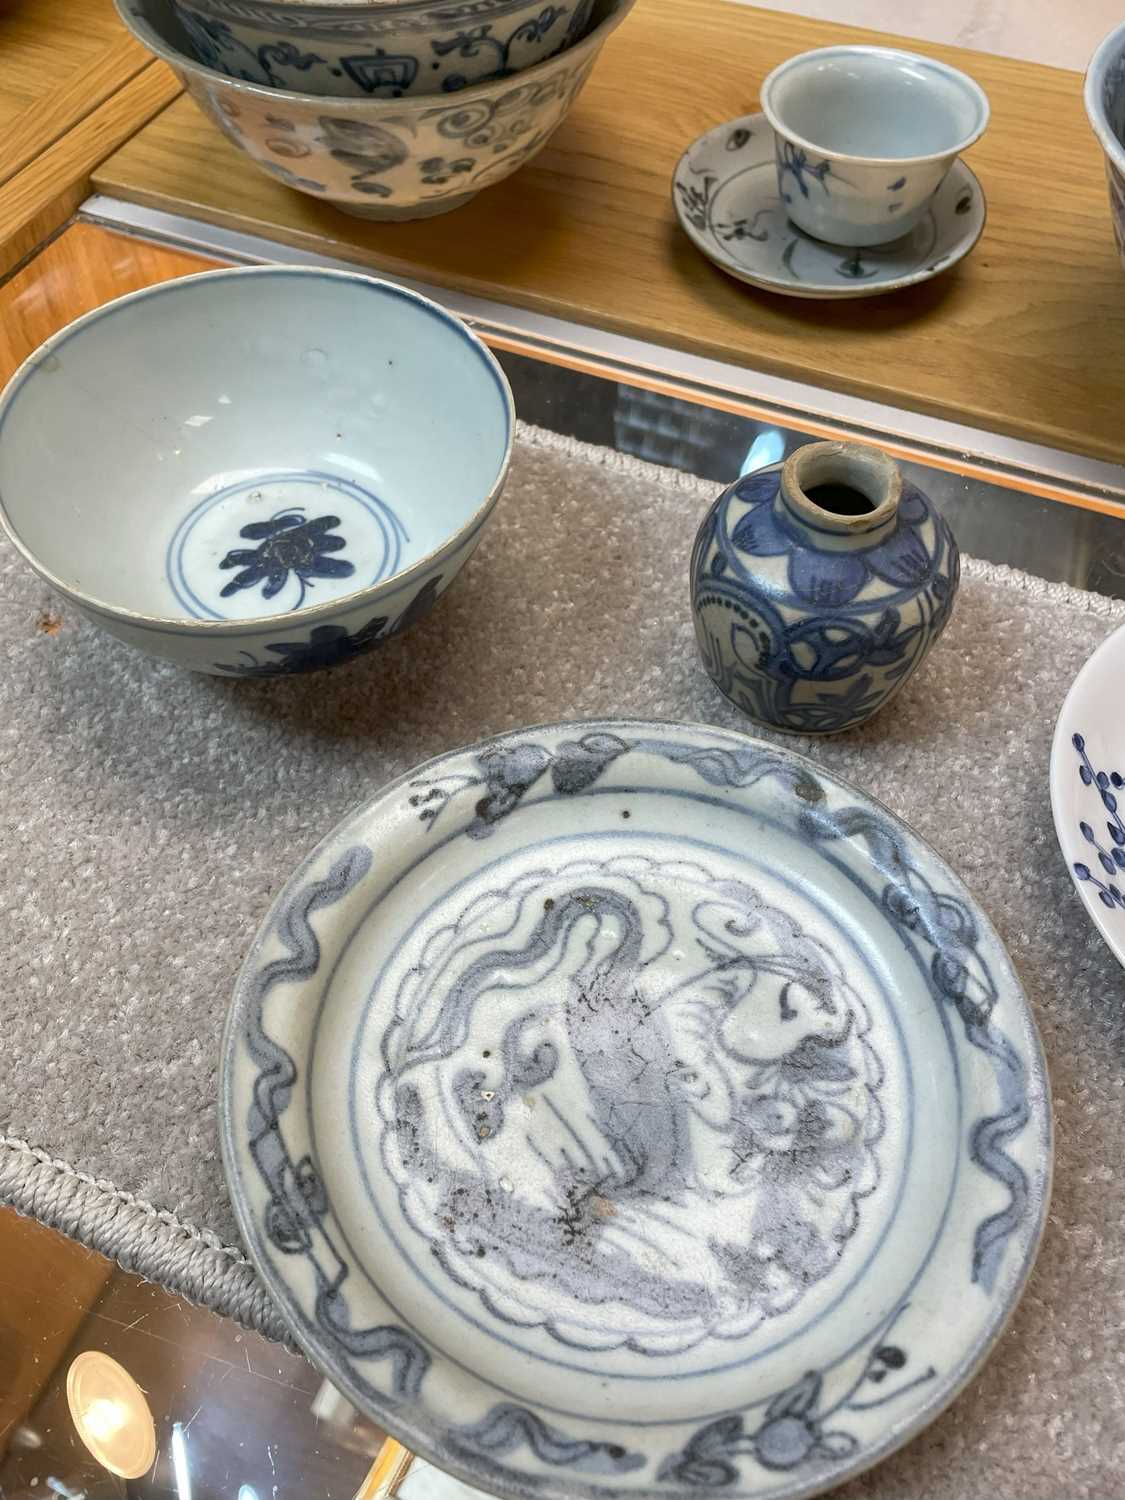 ASSORTED PROVINCIAL CHINESE & SOUTHEAST ASIAN PORCELAIN, including a kendi, five bowls 15cms - Image 13 of 34